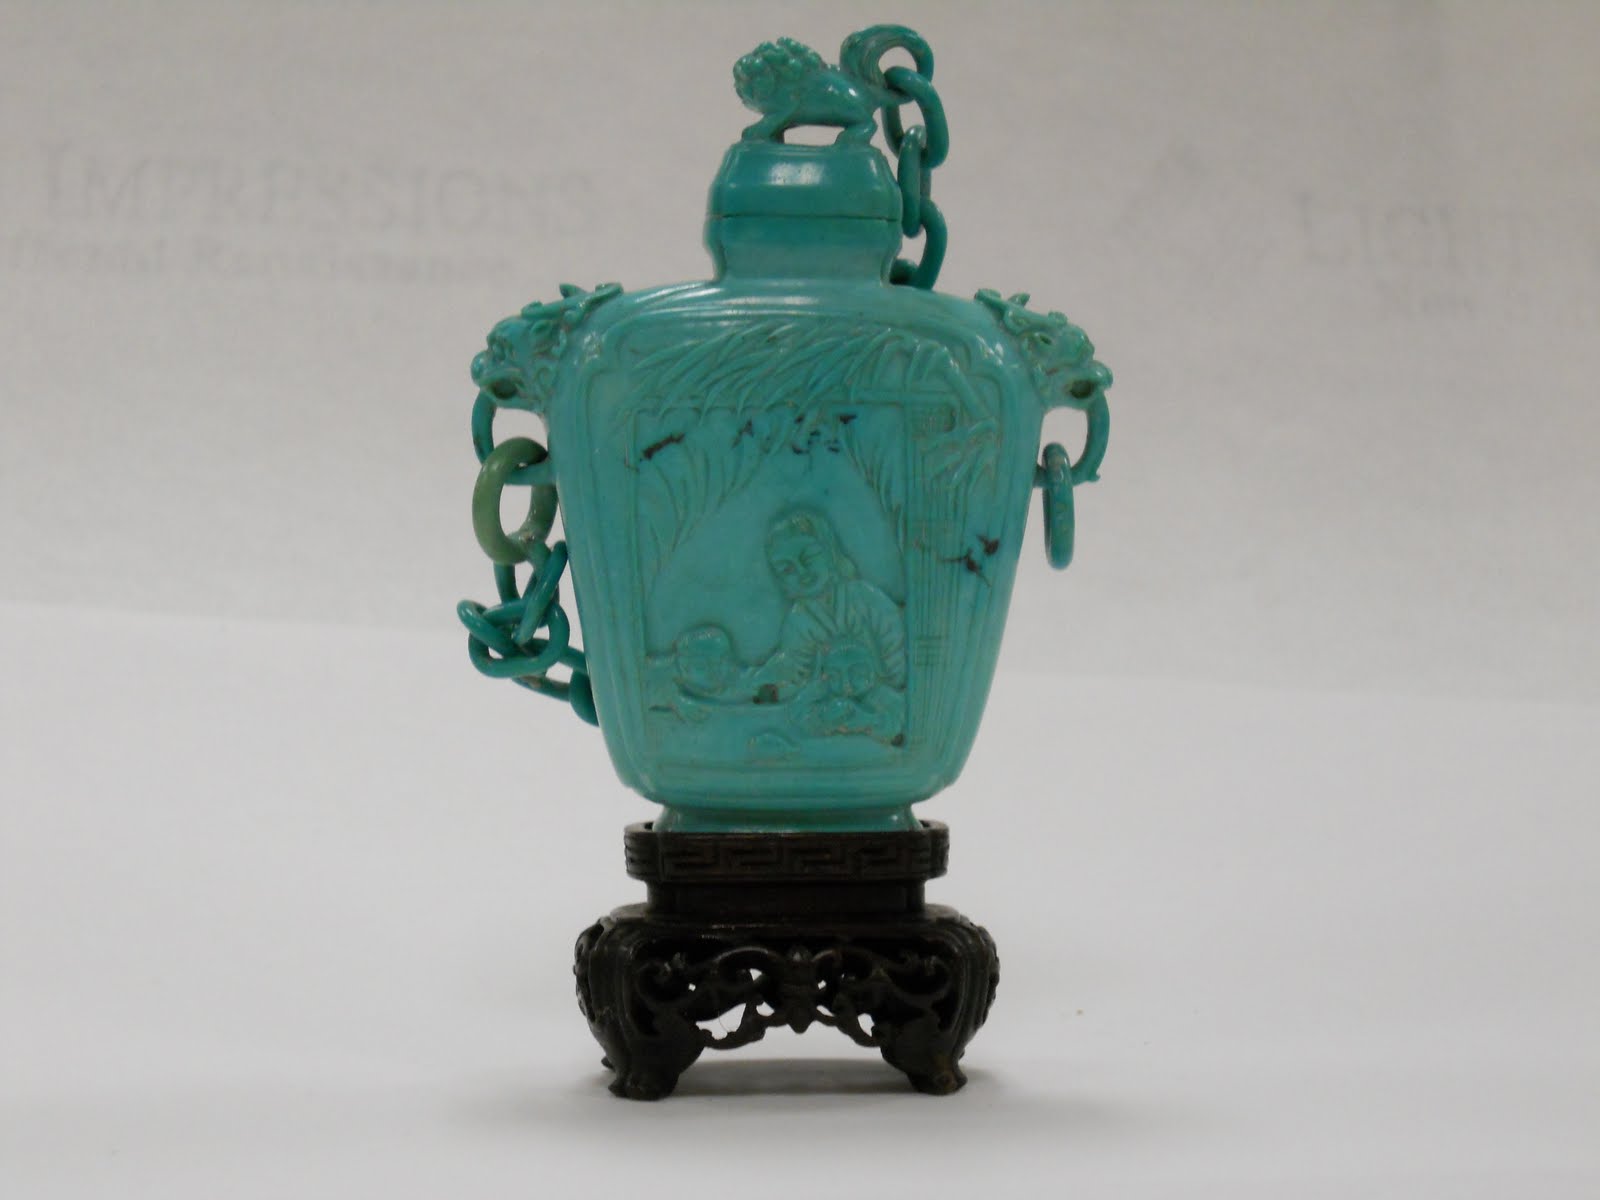 Carved turquoise snuff bottle with a chaned cover